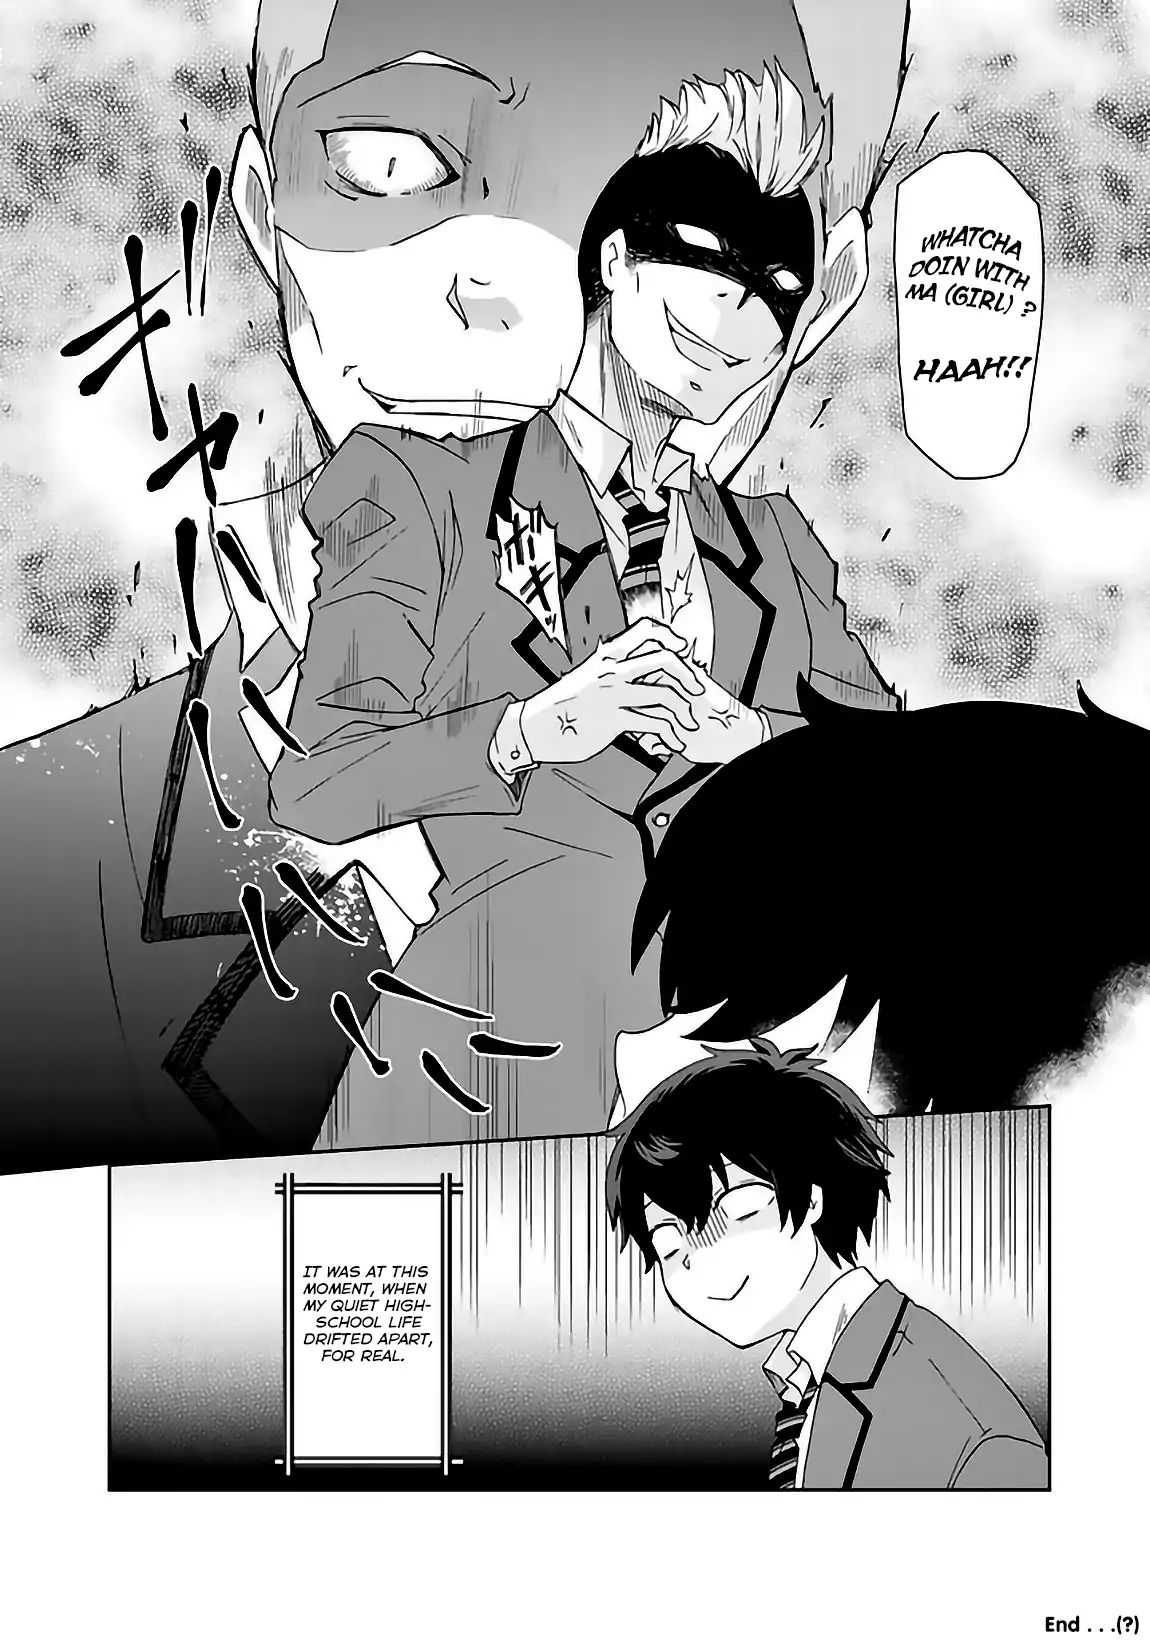 I, Who Possessed A Trash Skill 【Thermal Operator】, Became Unrivaled. Chapter 1.5 #9